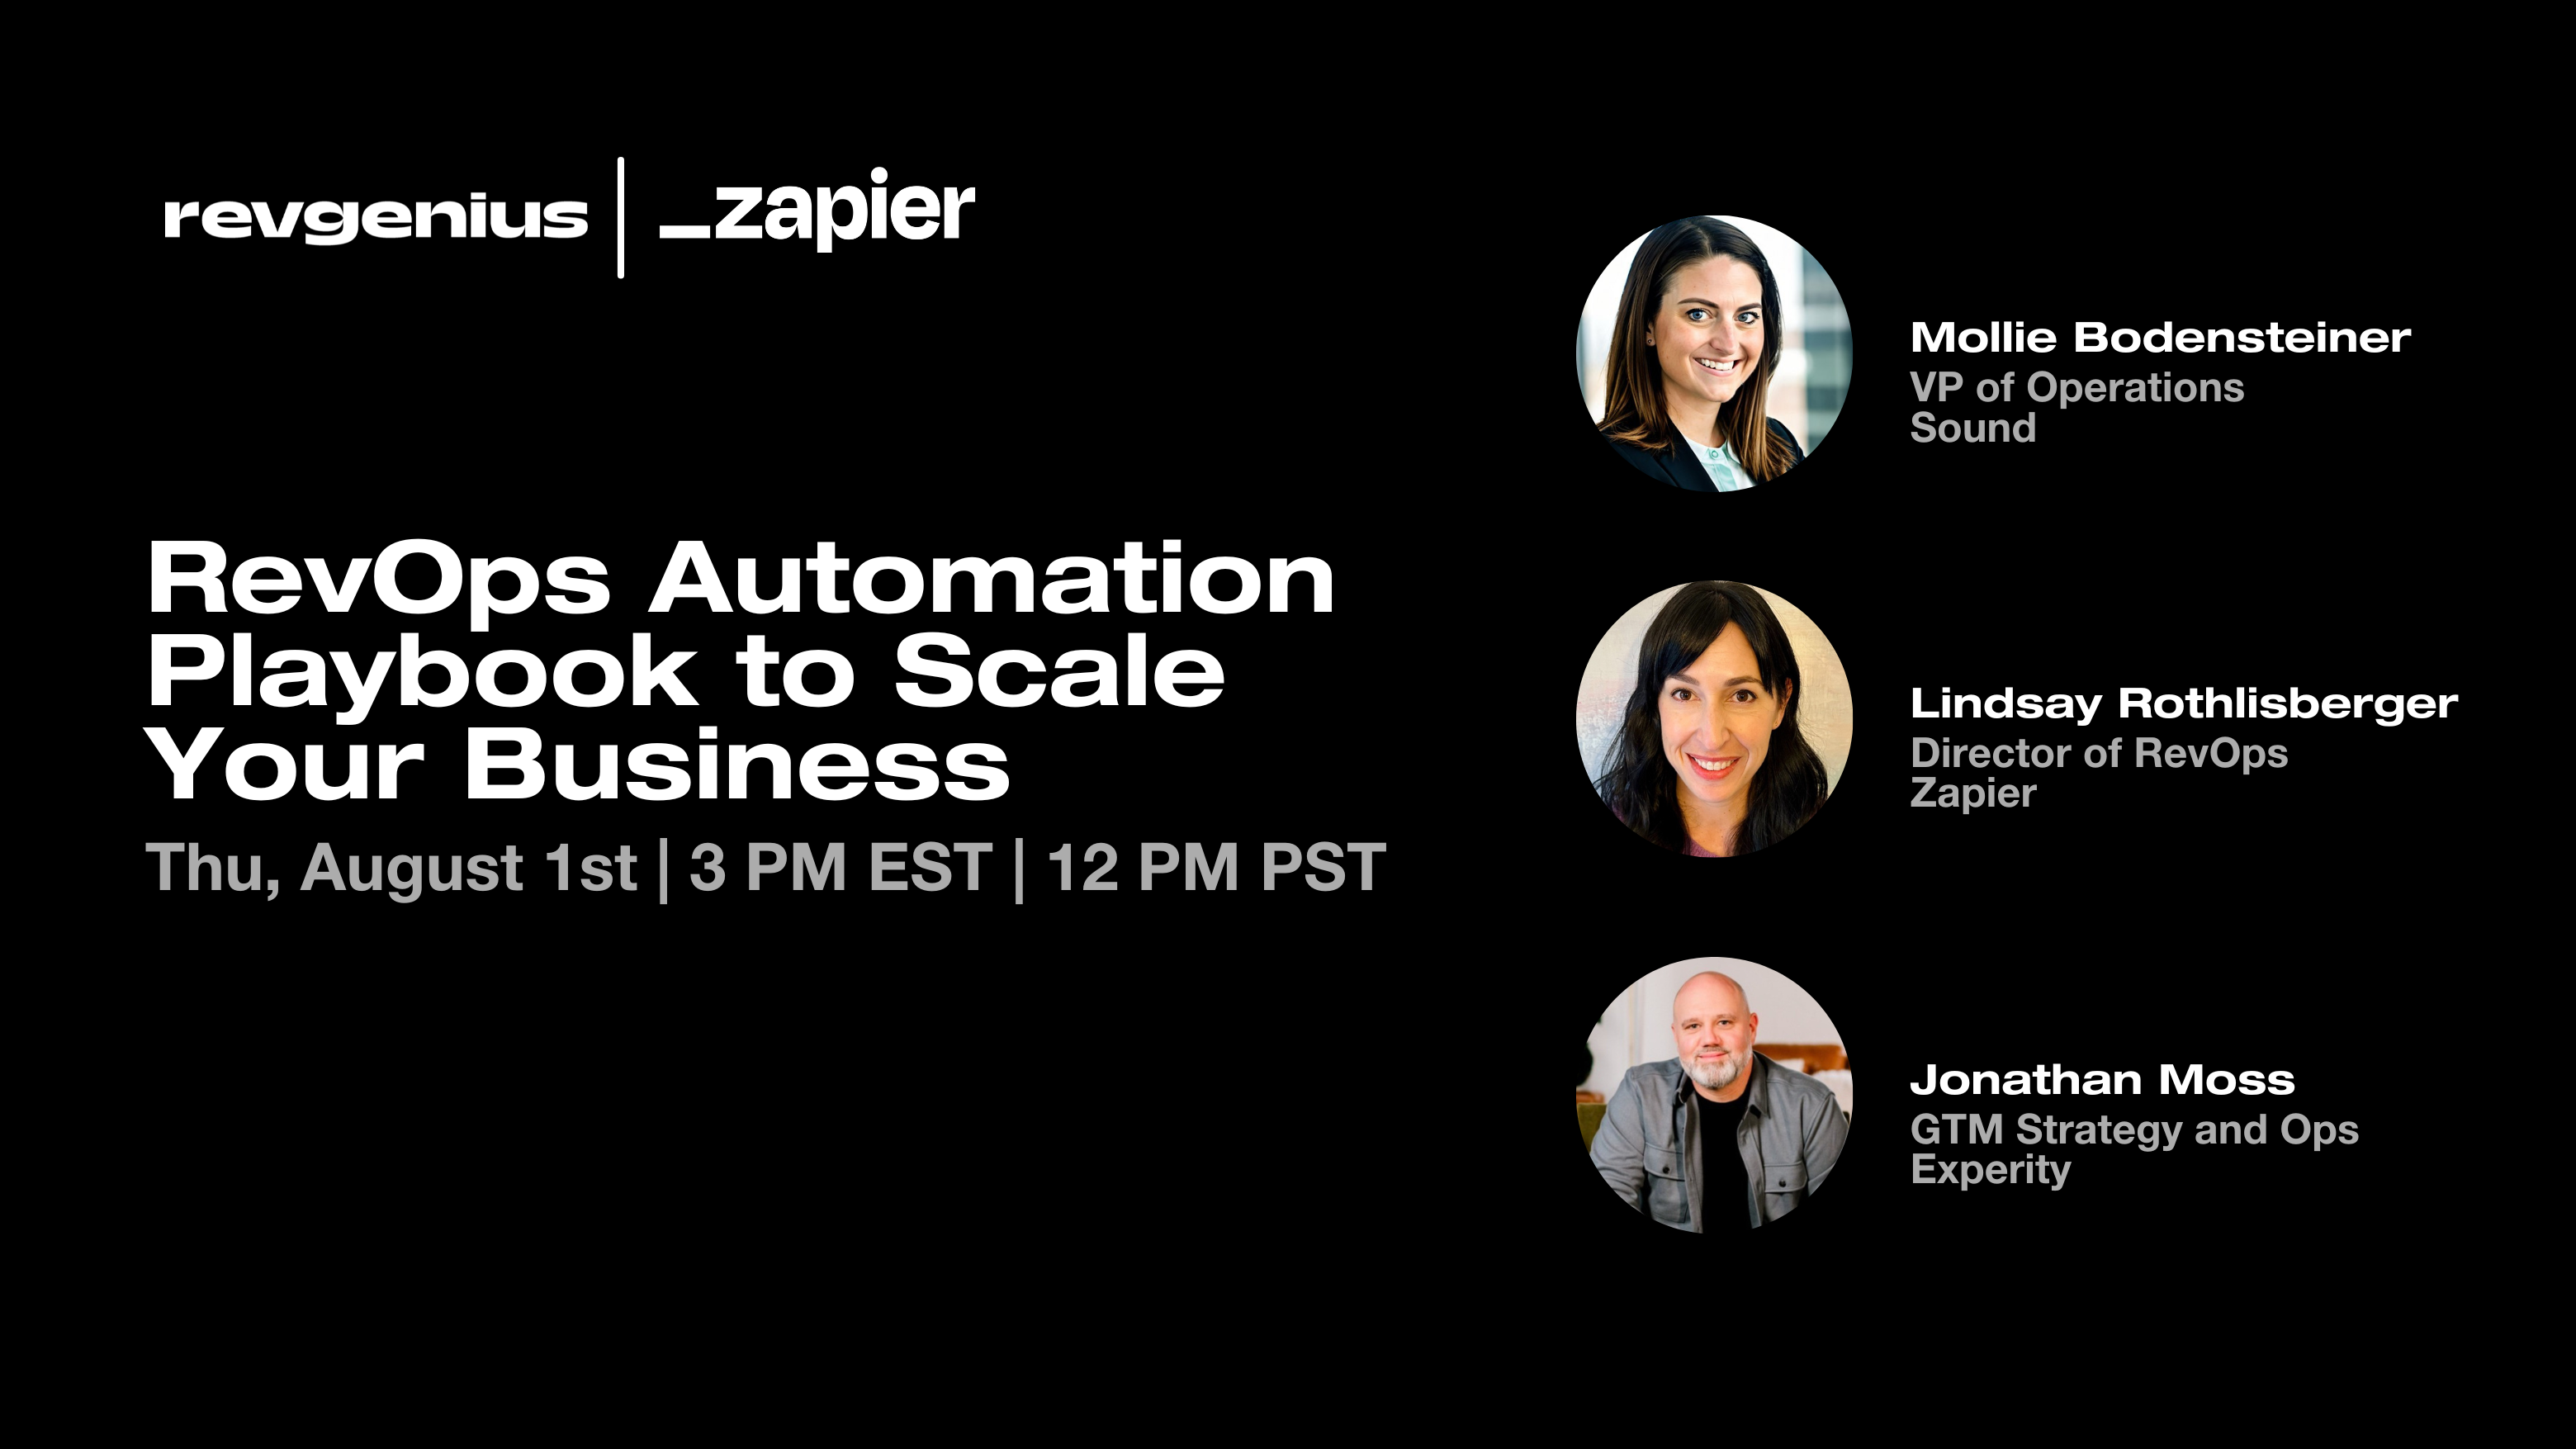 RevOps Automation Playbook to Scale Your Business_webinar (2)